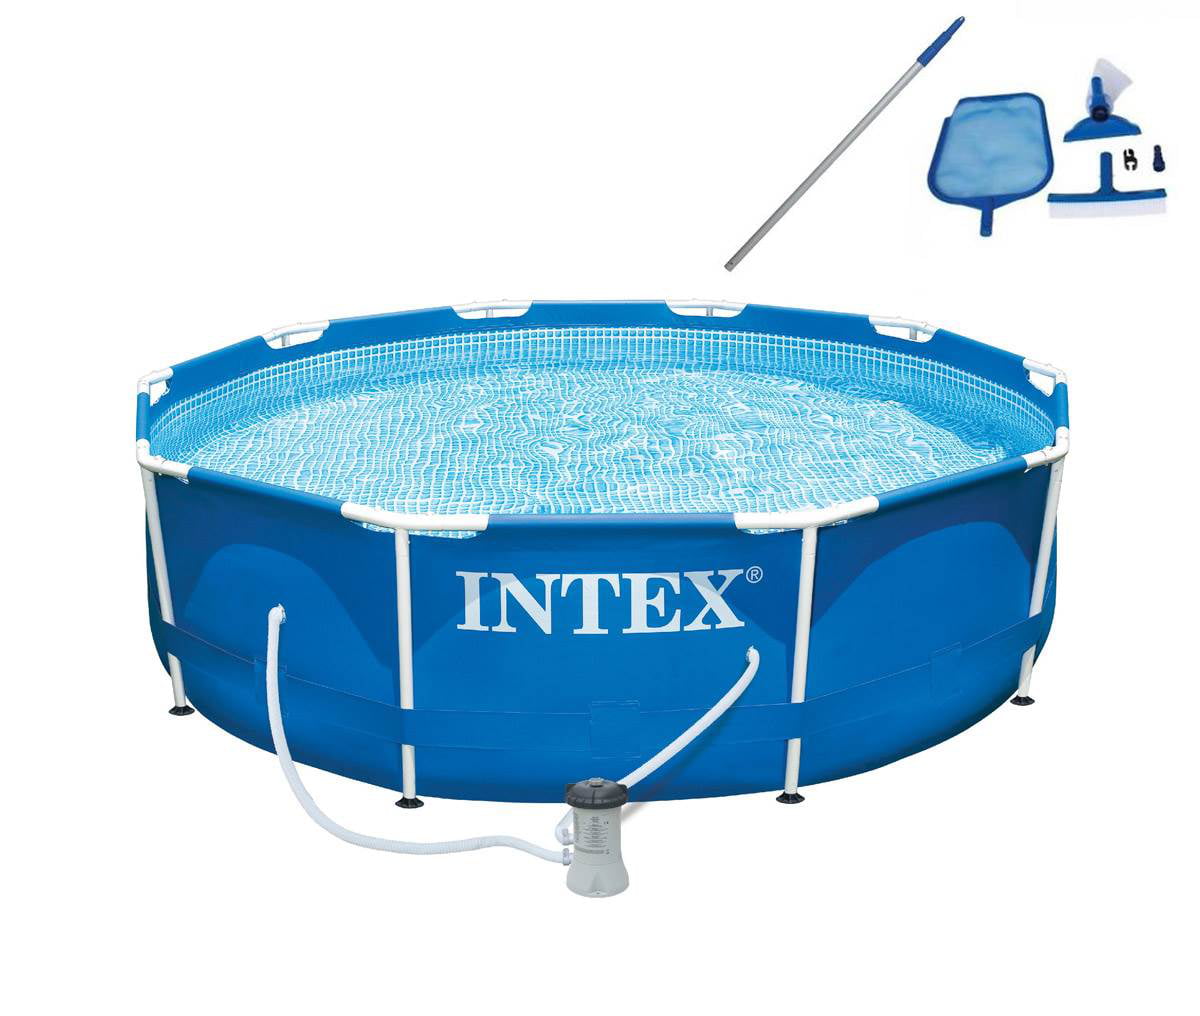 Intex Type A Filter Cartridge for Intex Pump for 6FT 8FT 10FT 12FT 15FT Pools 